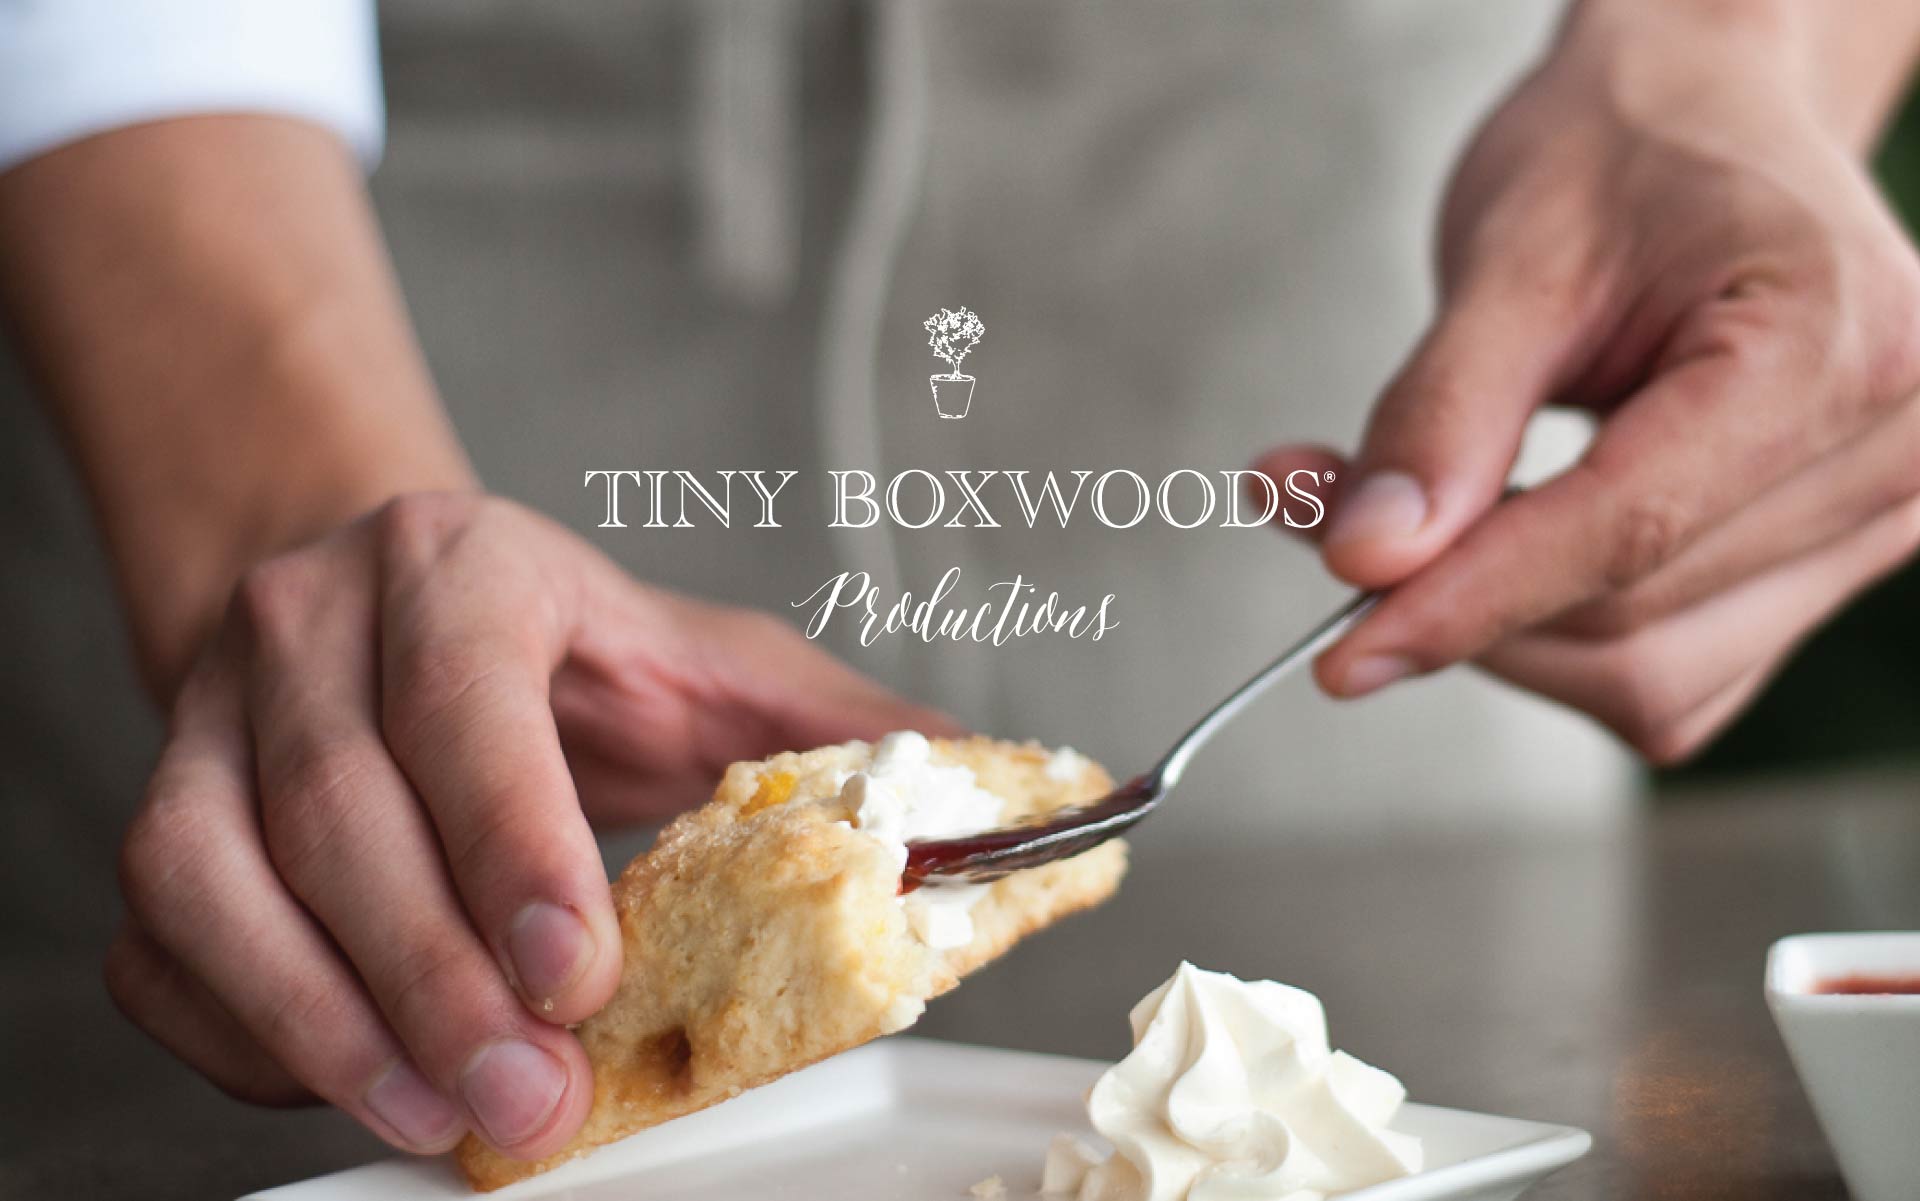 Branding identity design by Creative Retail Packaging for Tiny Boxwood Productions